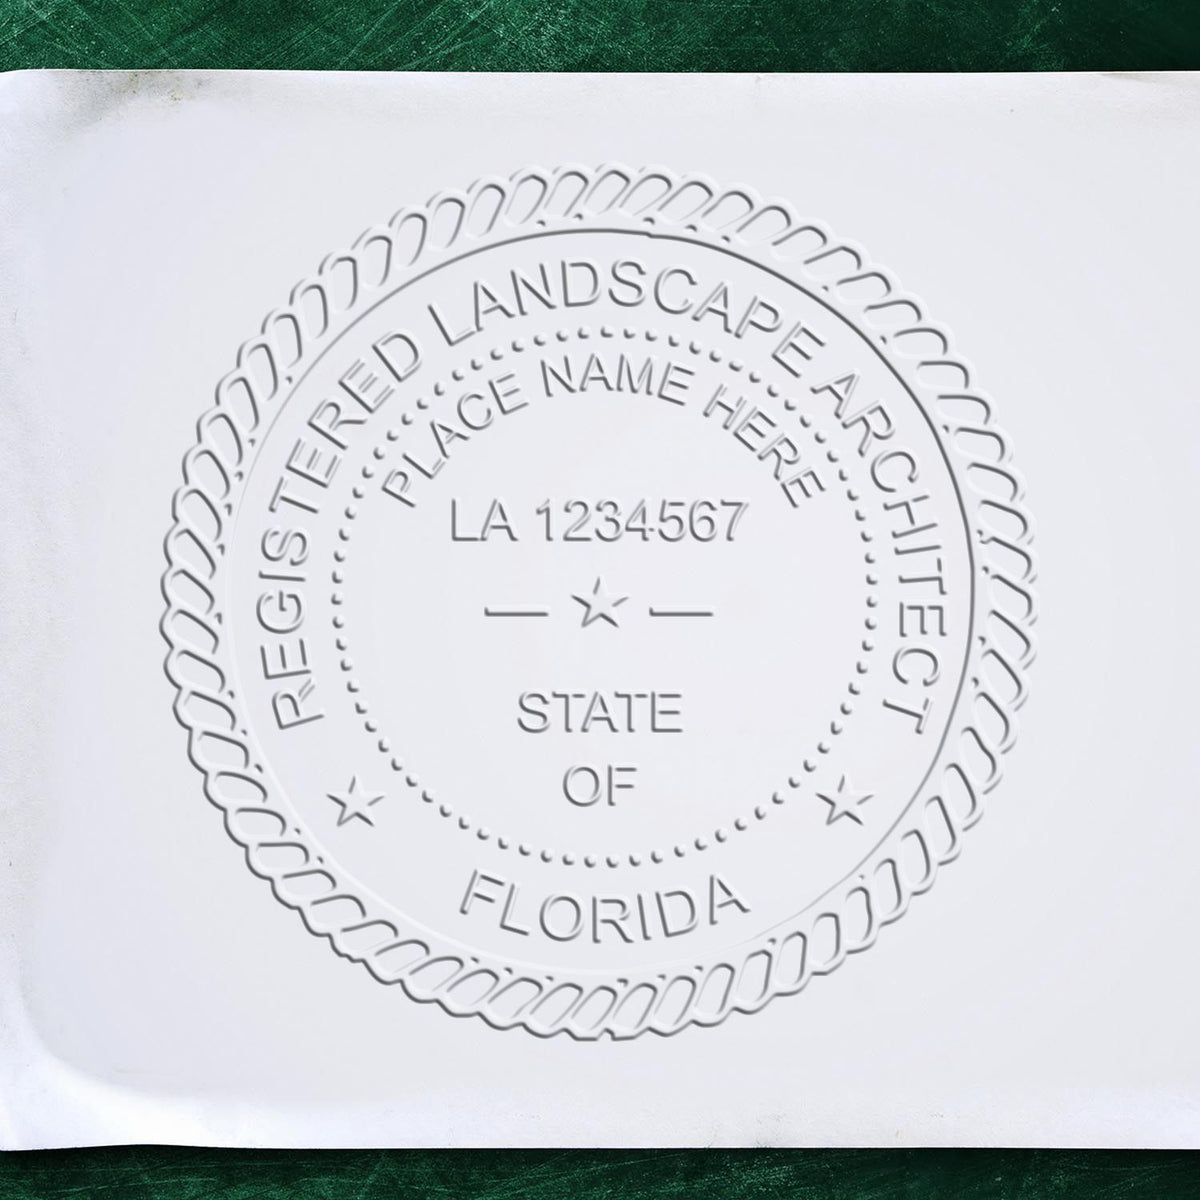 A stamped impression of the Soft Pocket Florida Landscape Architect Embosser in this stylish lifestyle photo, setting the tone for a unique and personalized product.